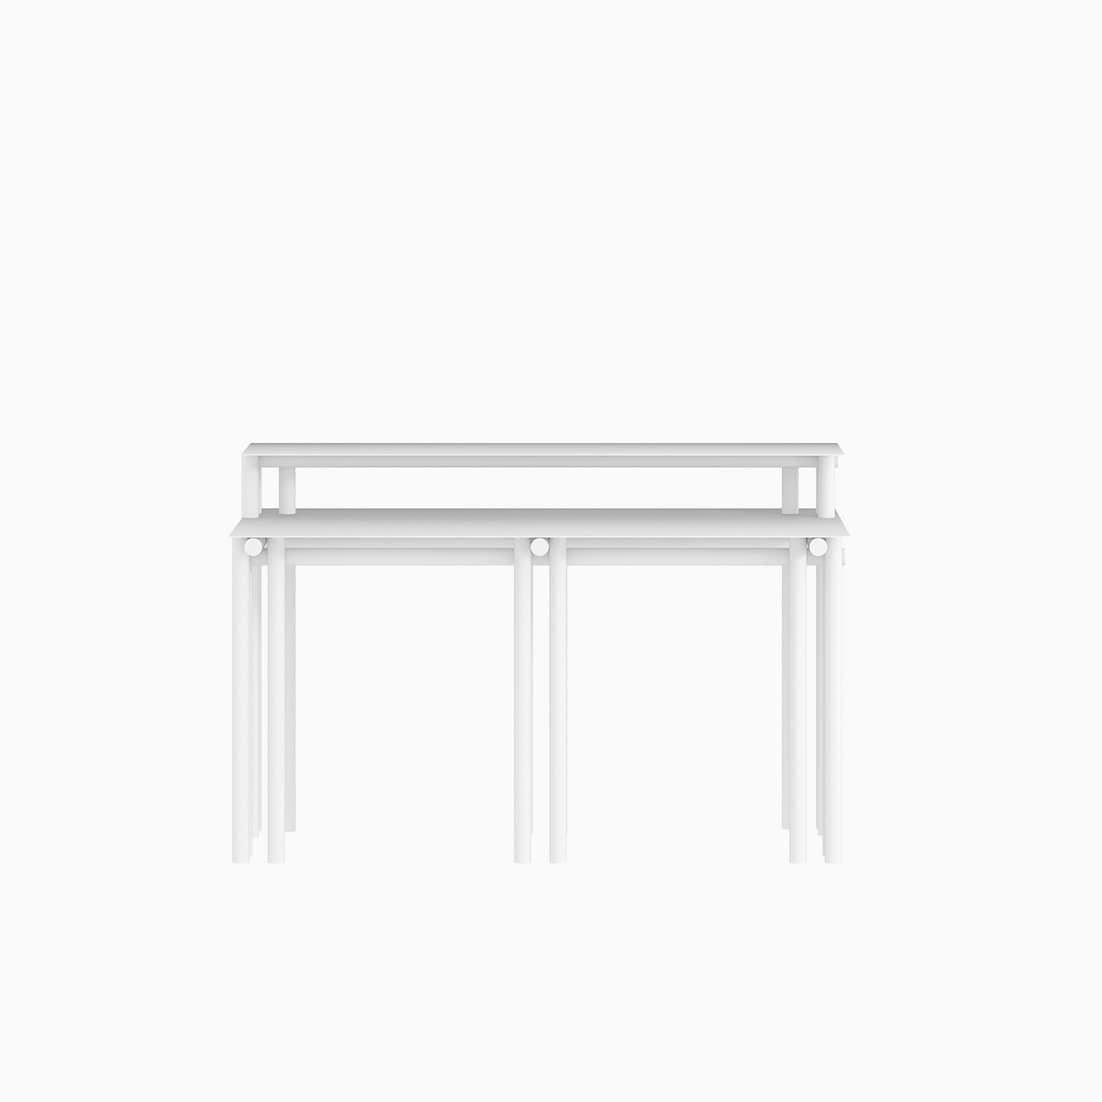 Conceptualized in 2023 by Leonardo Floresvillar, and crafted by hand with galvanized aluminum, coated with matte electrostatic paint. 
The Dolmen Desk  was designed with two surface heights to work comfortably on a computer at your studio or at your